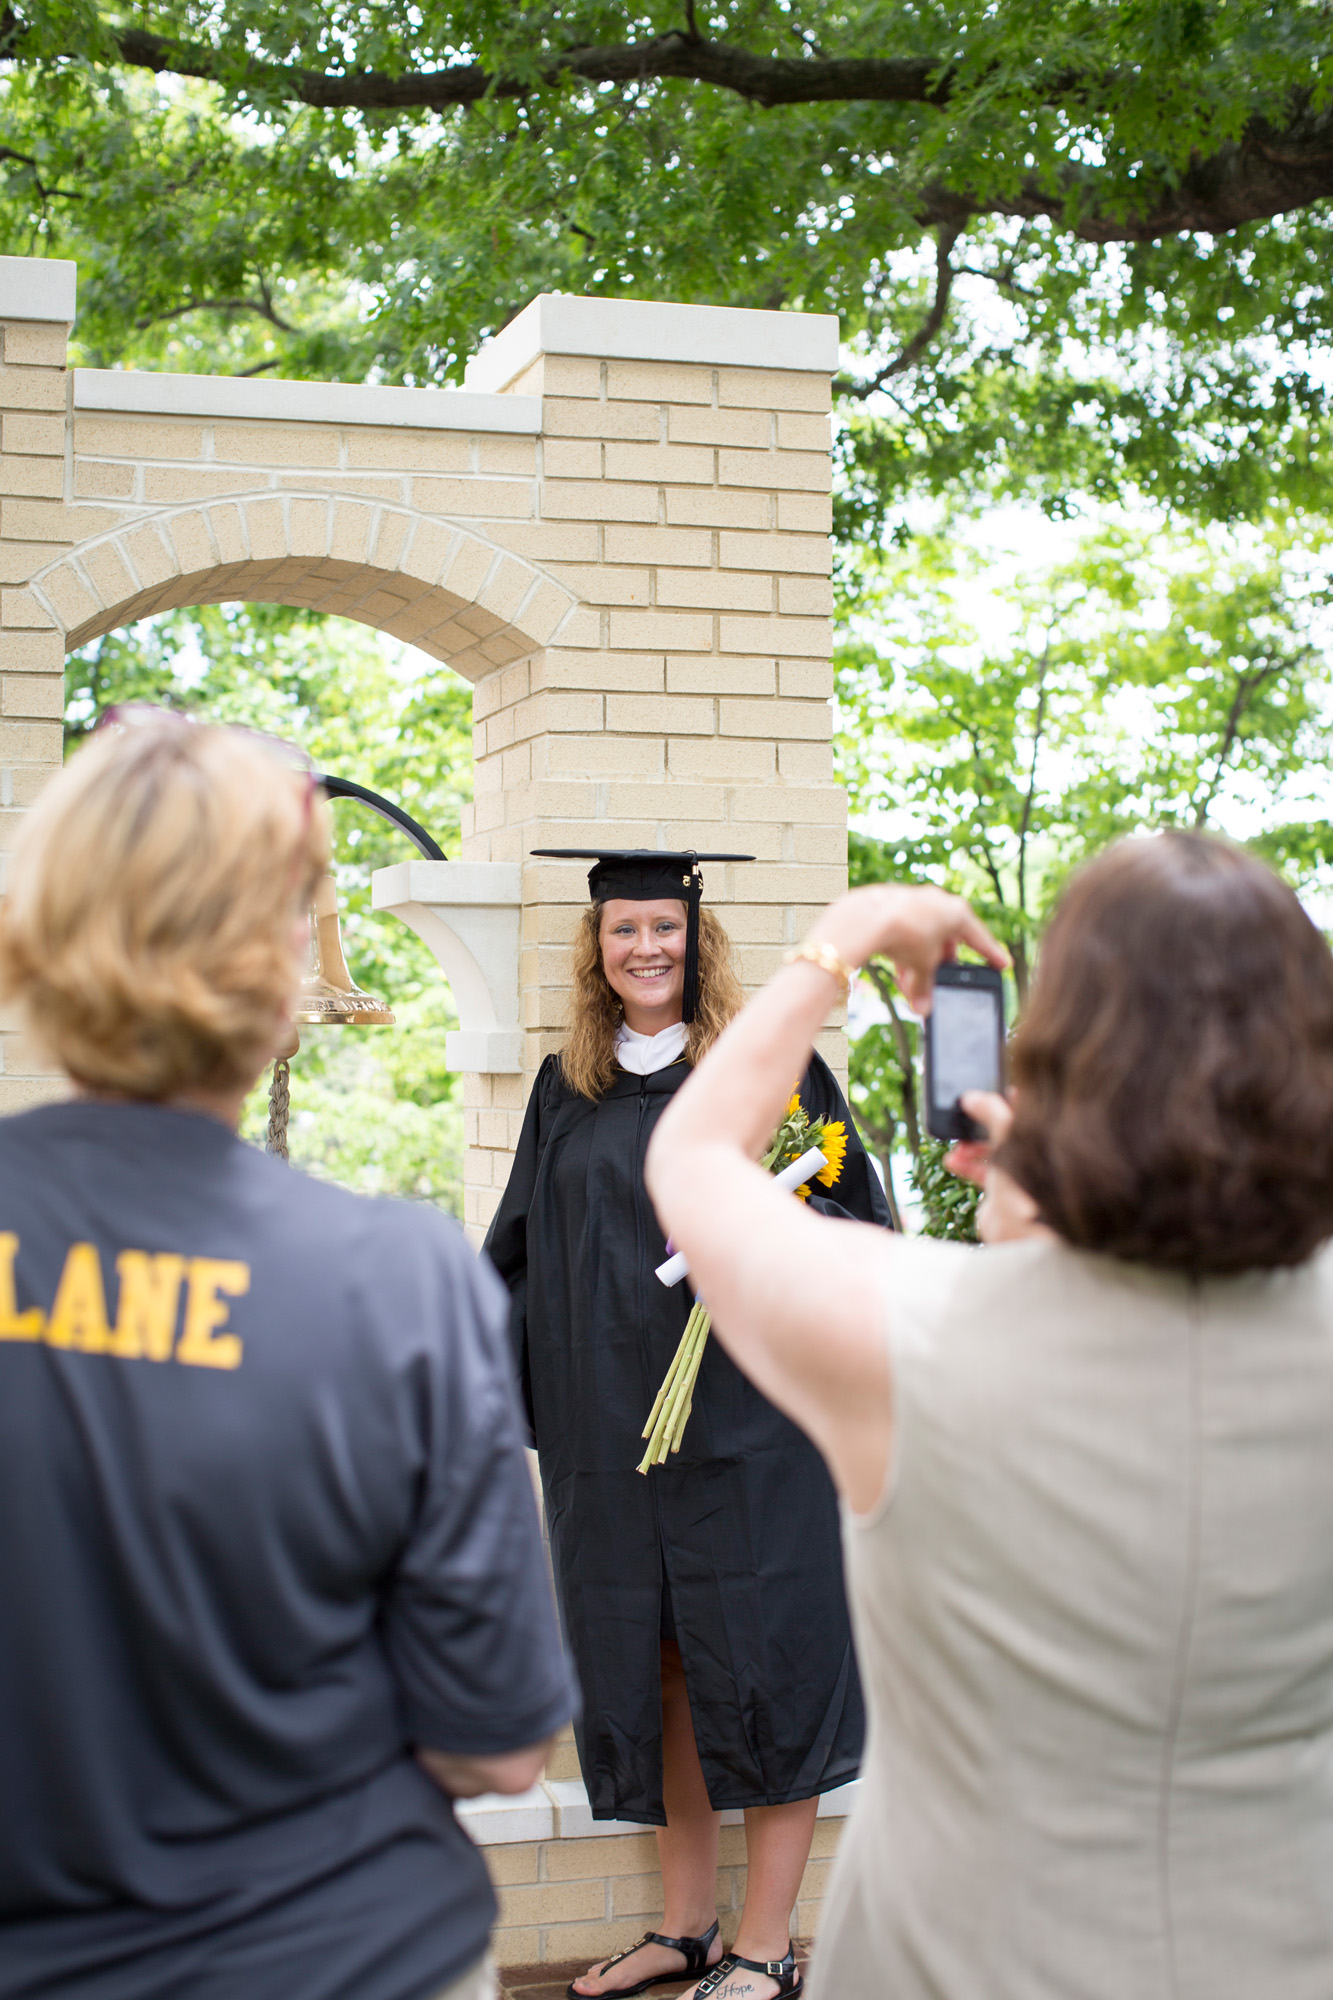 Mary Baldwin Commencement 2015